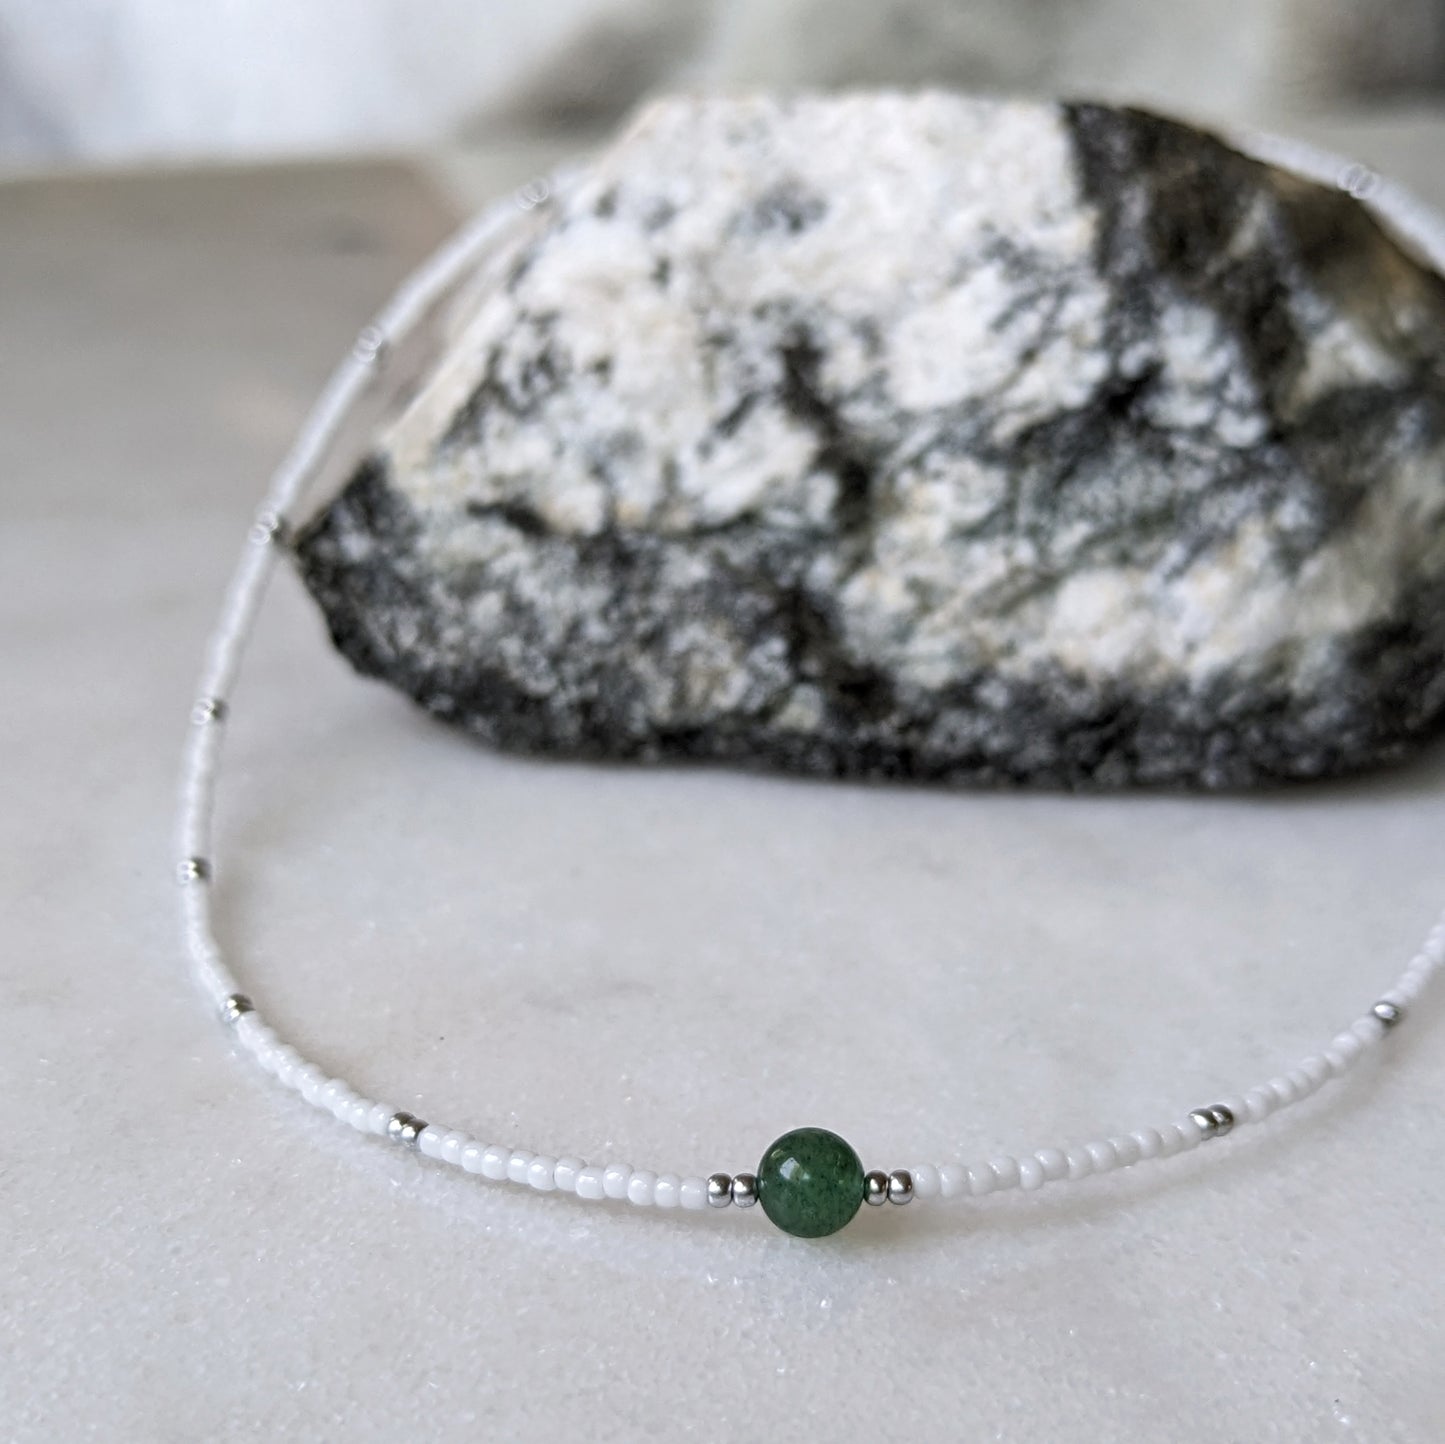 Green Aventurine White & Silver Beaded Accent Choker Necklace